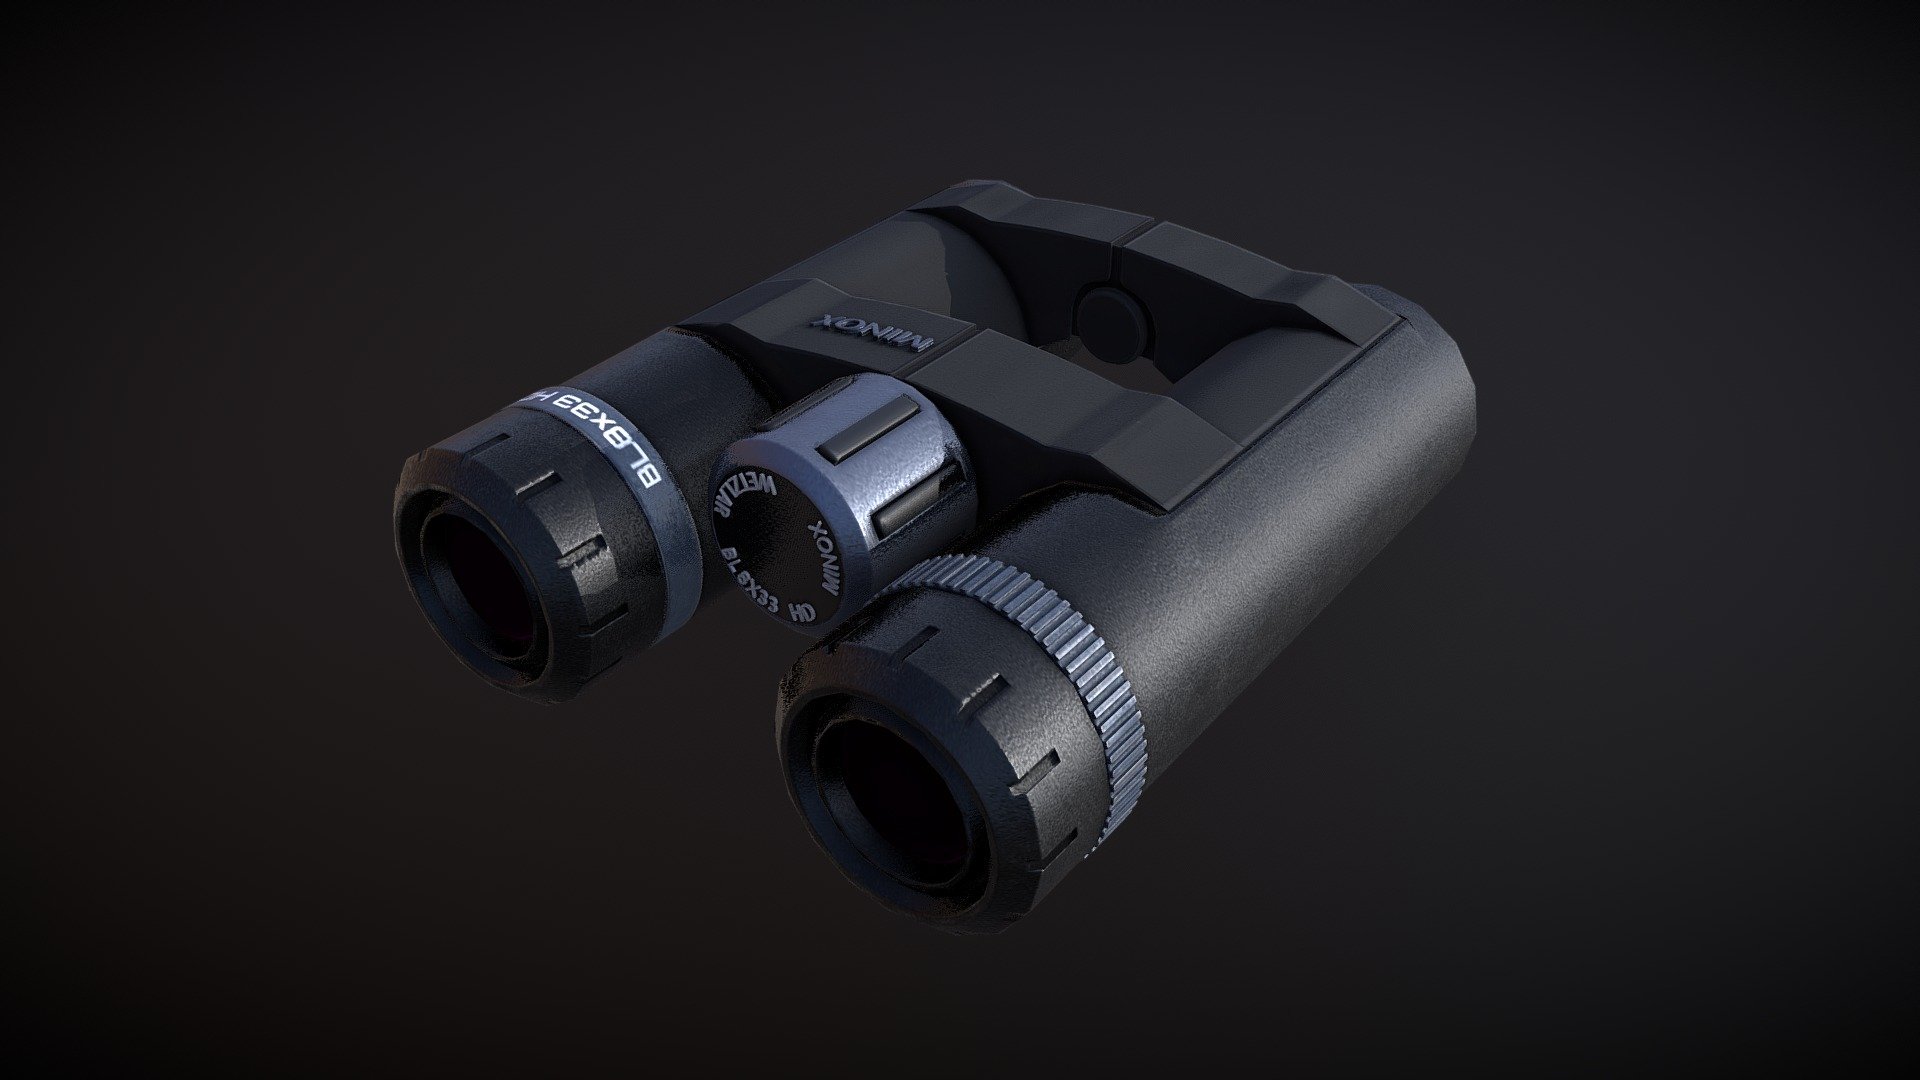 Minox Binoculars, life like high detail model with non over lapping manually placed UVs and PRB textures.
Hard edge modelling in Zbrush and textured in Substance Painter 3d model